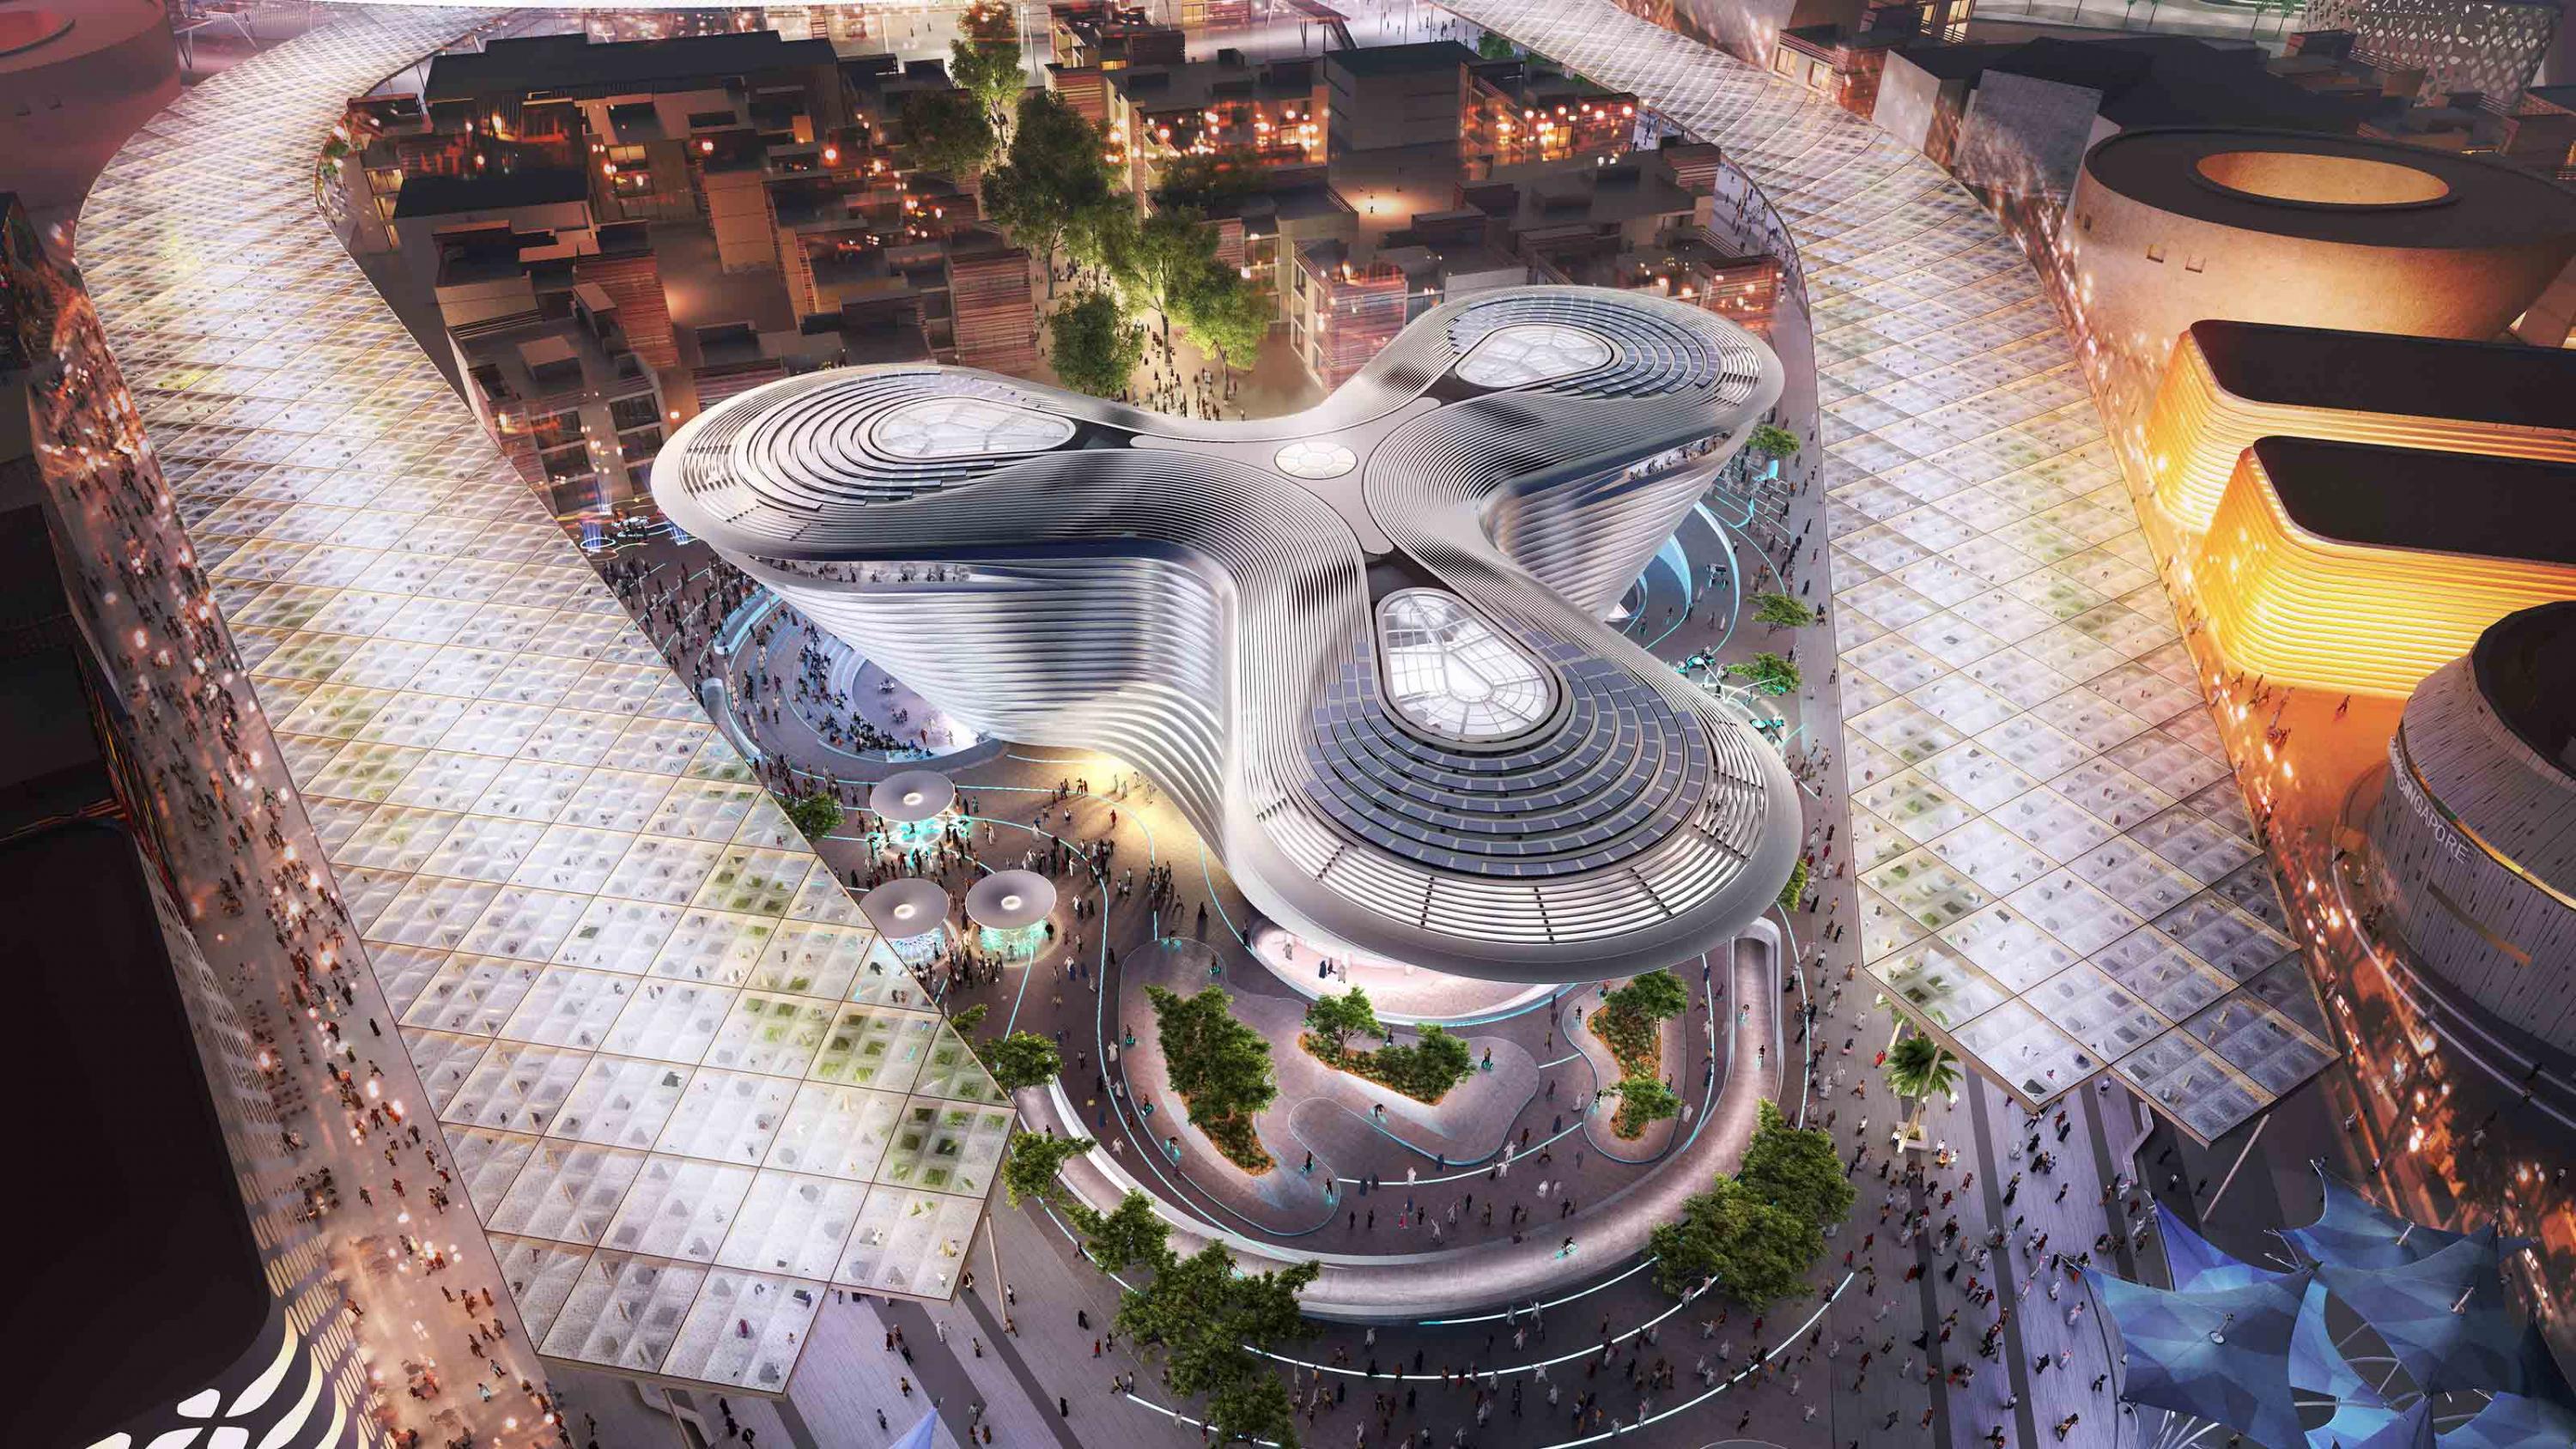 Expo 2020 Dubai Here’s How Much You Need to Spend on Tickets for the